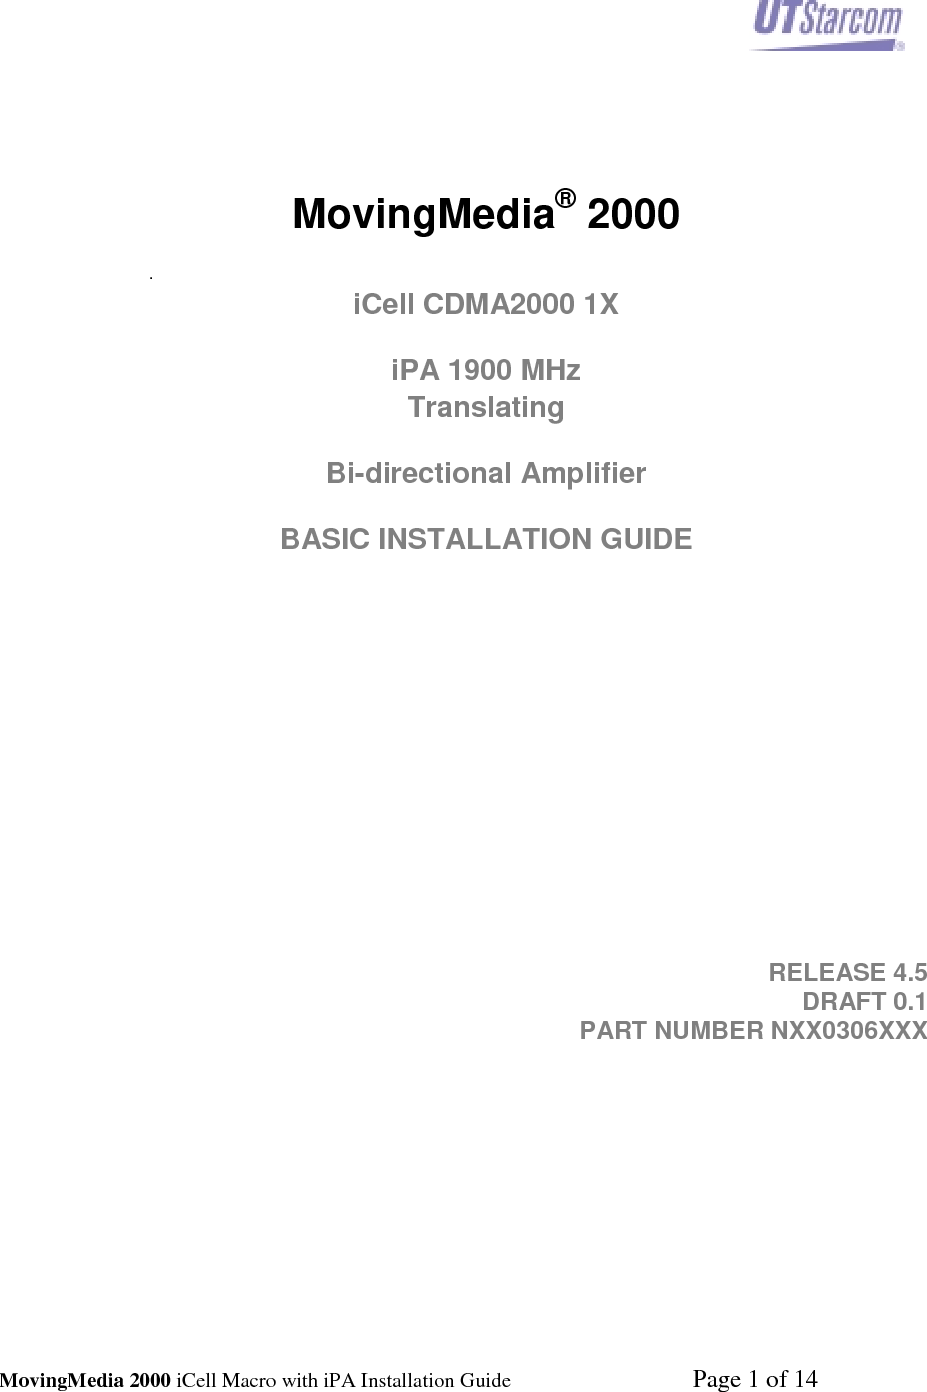 MovingMedia 2000 iCell Macro with iPA Installation Guide    Page 2 of 14